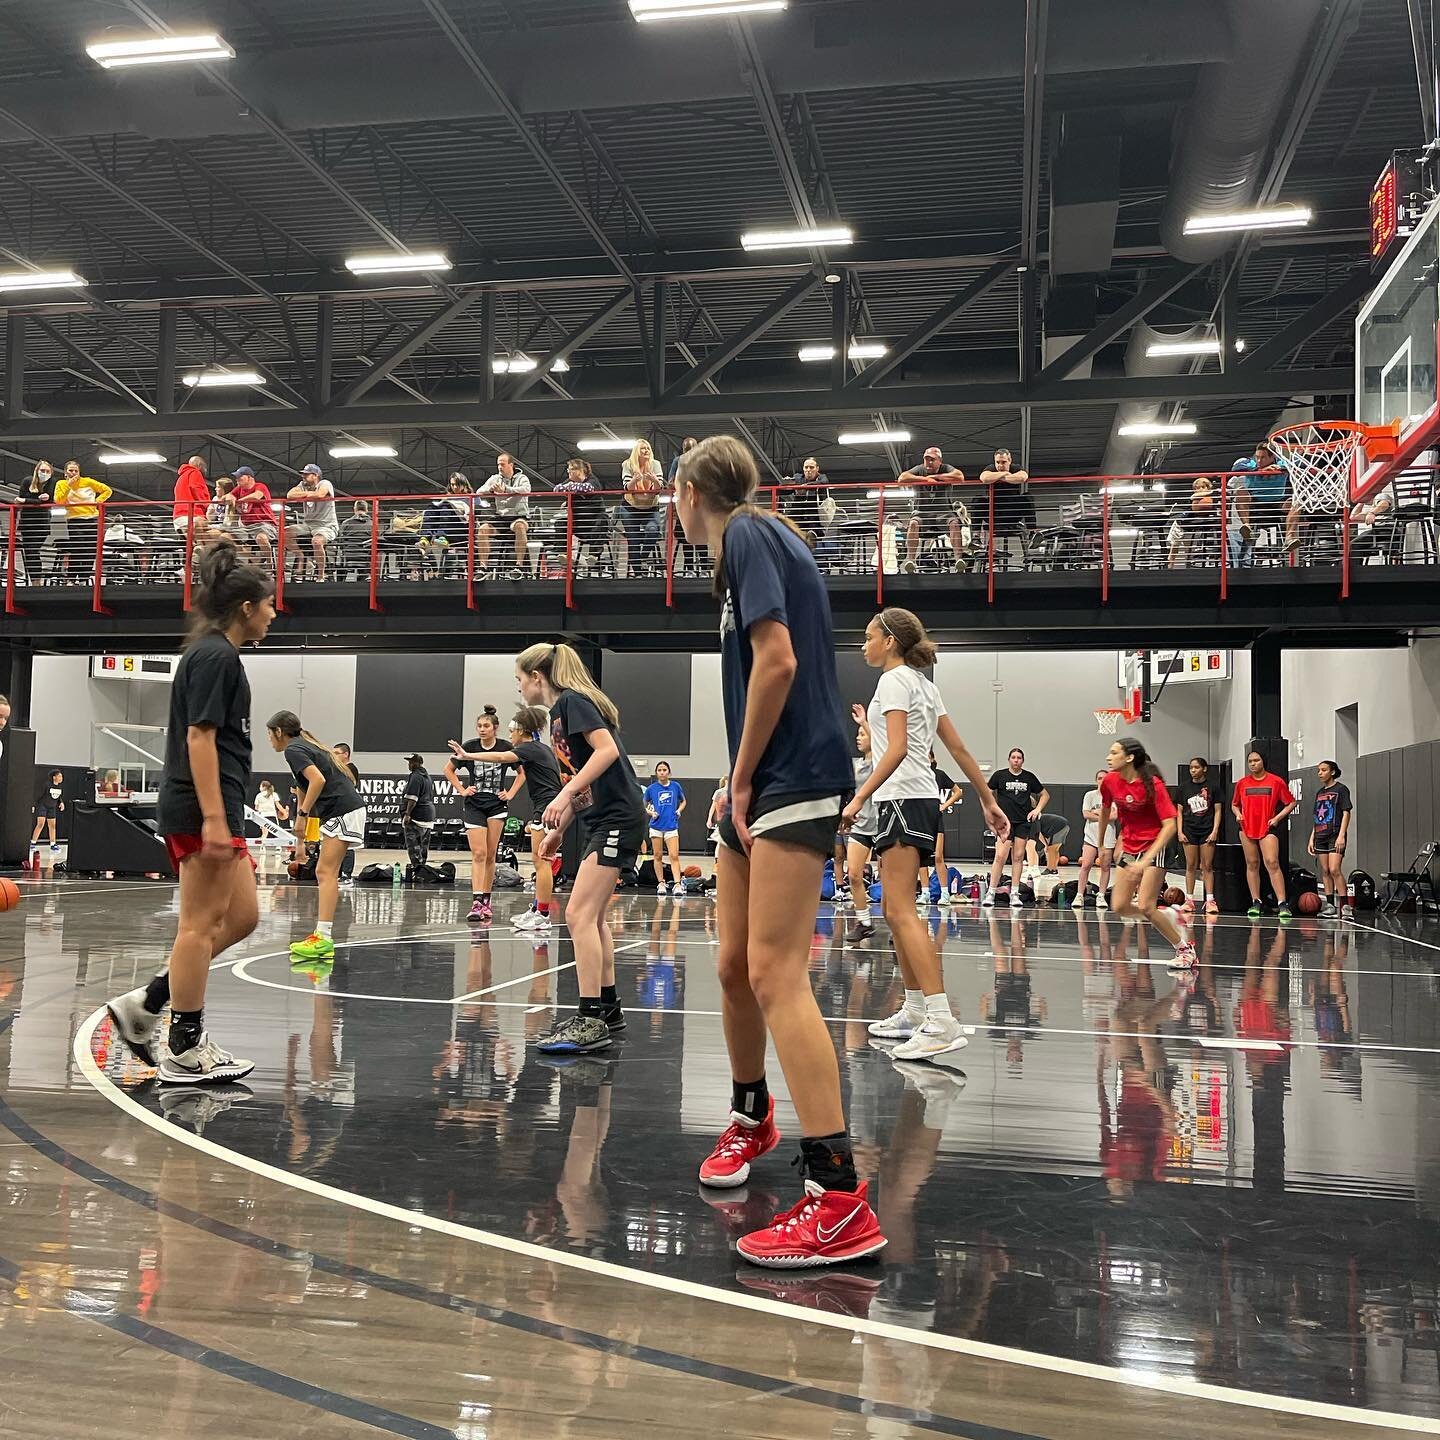 Practices start March 21

April Stops:
📍Vegas Apr 8
📍 Texas Apr 22

17 @adidas 
17 National
16 @adidas 
16 National 
16 Regional 
15 National 
15 Regional 

If you want to get better this summer with the top players, coaches, and trainers in AZ, @a